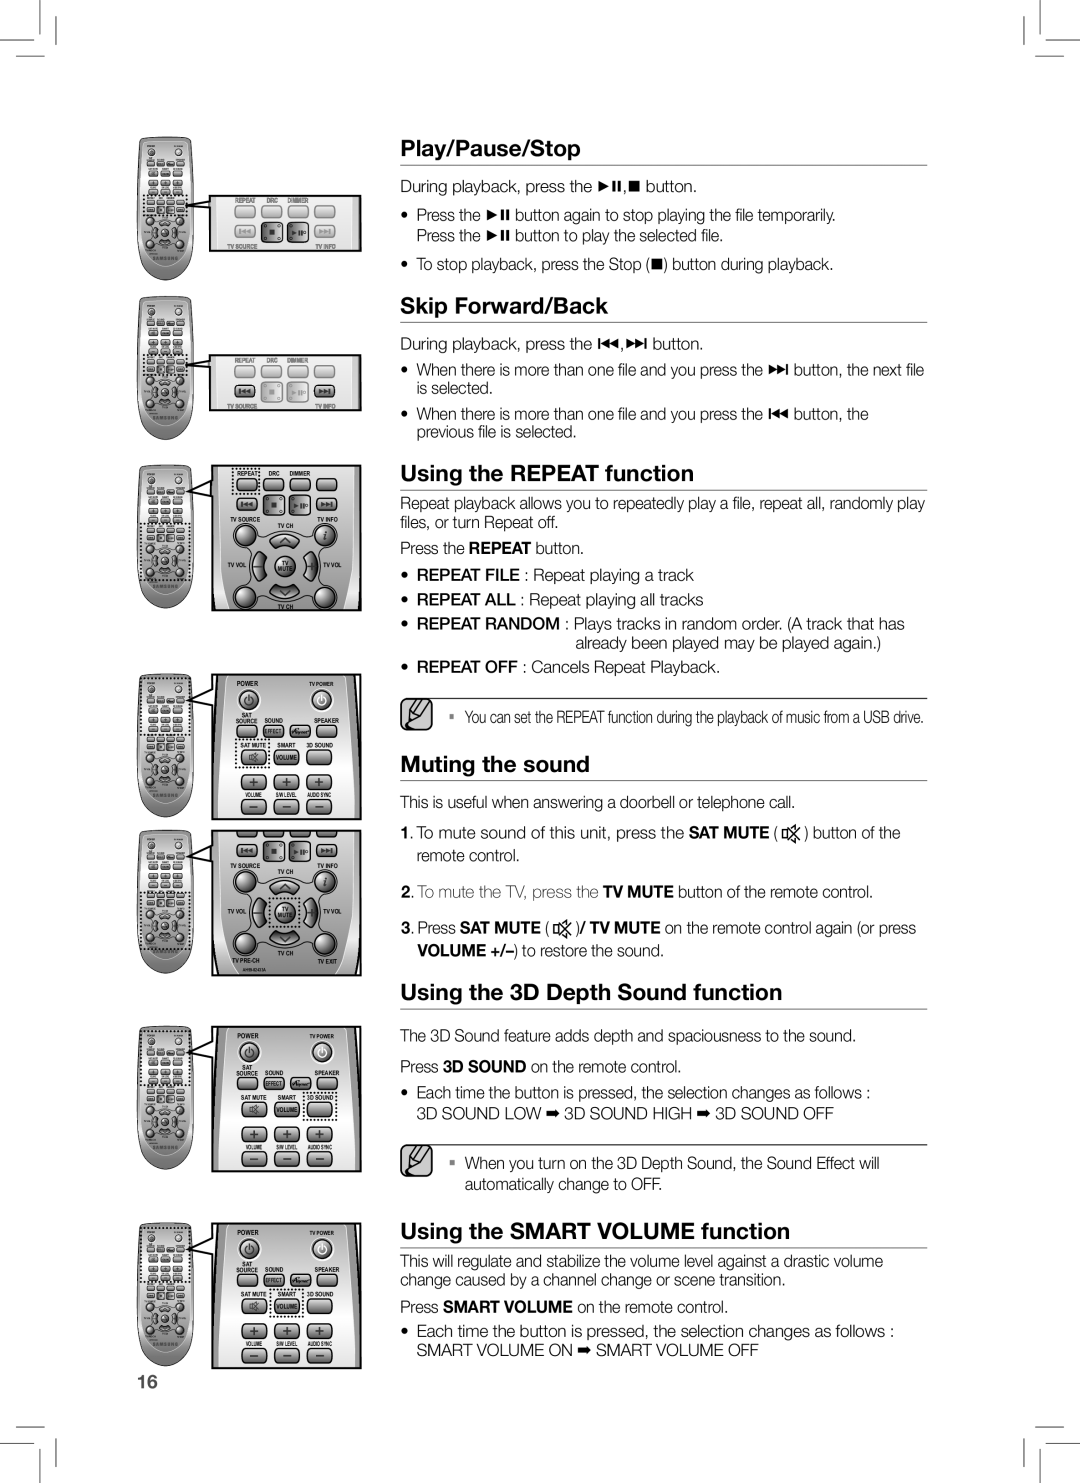 Samsung HW-E350 user manual Play/Pause/Stop, Skip Forward/Back, Using the REPEAT function, Muting the sound 